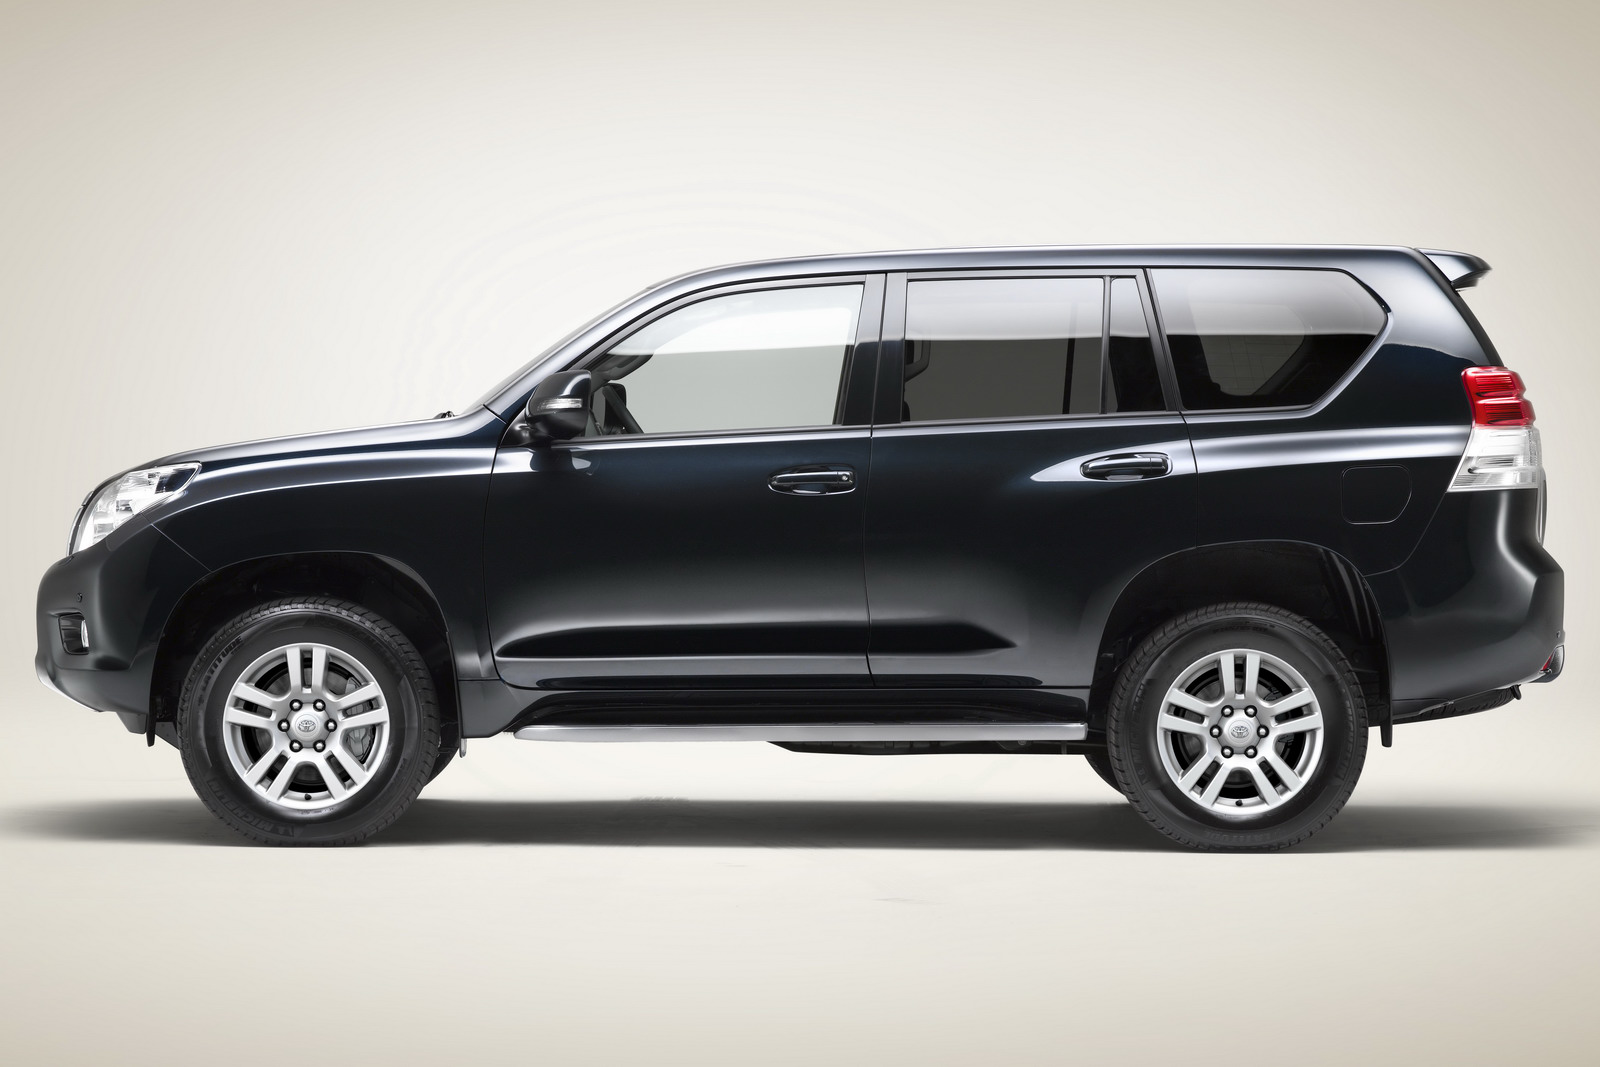 The Lexus GX460 is a renewable gilded version of the Toyota 4Runner, 